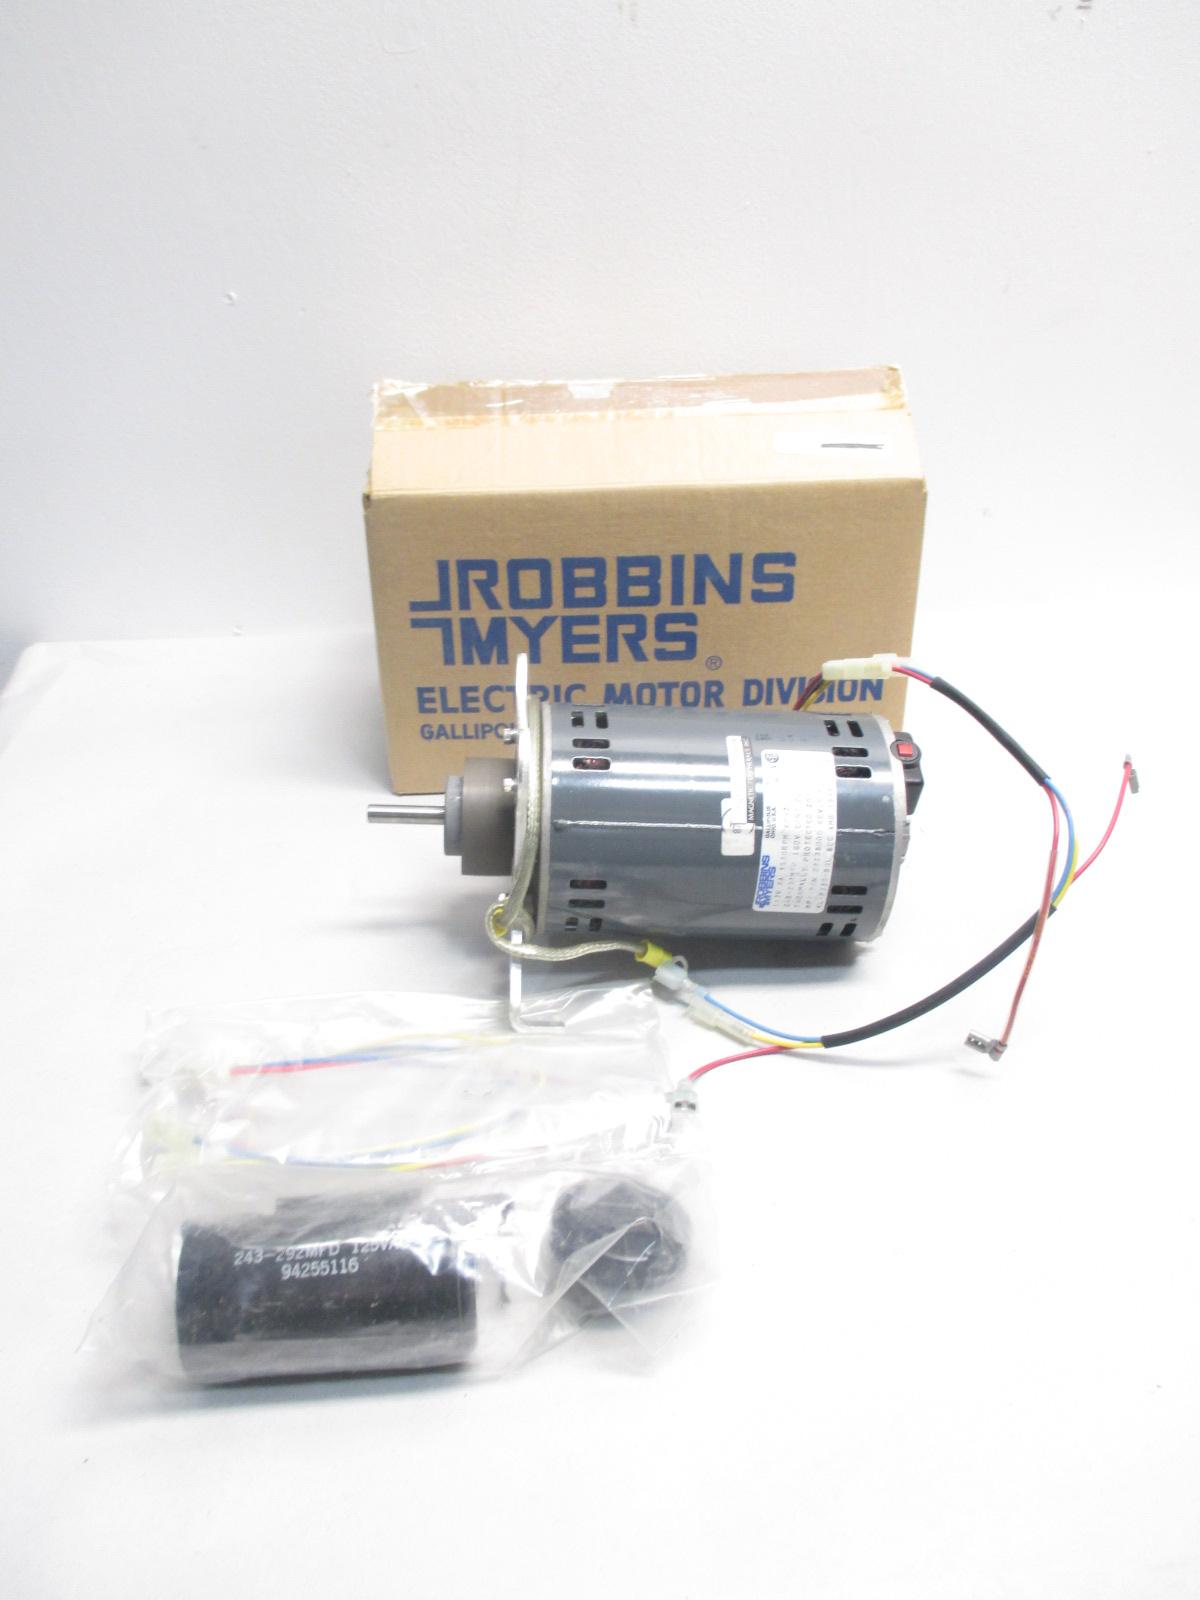 KL-J330-BOT-2 Gear Reduced Motor Lot of 2 Details about   Robbins & Myers Inc 